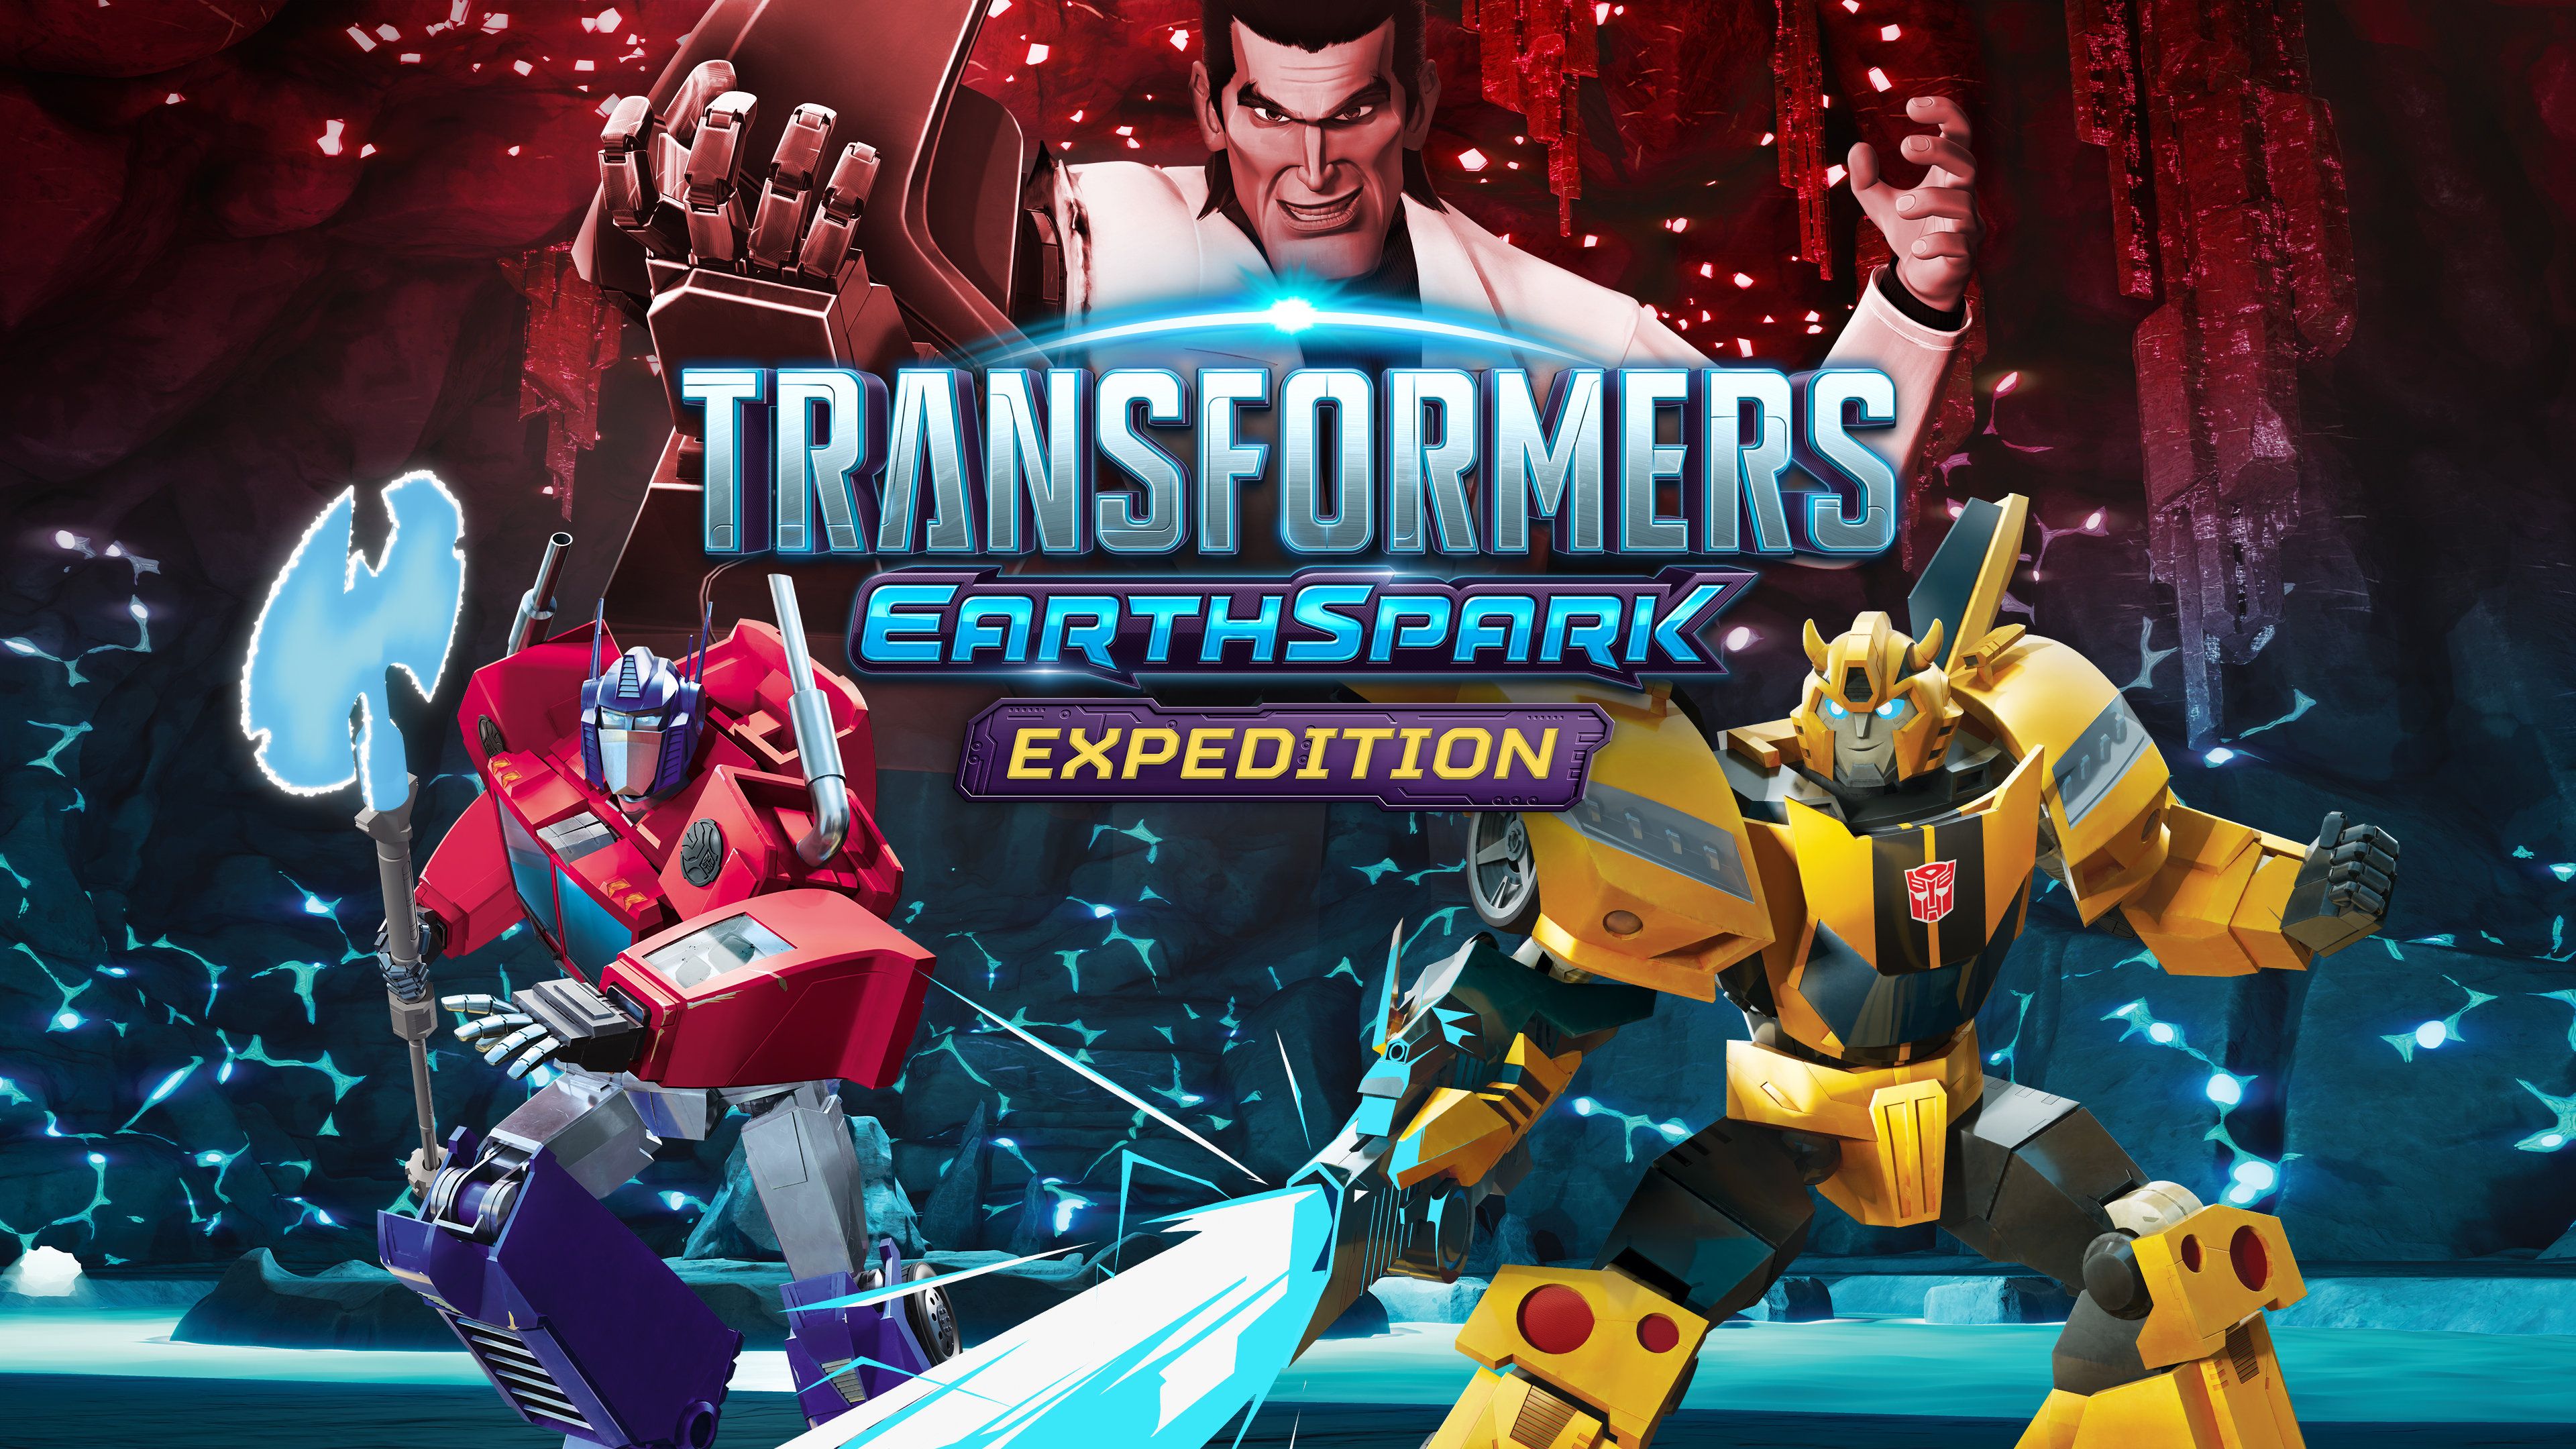 Transformers Earthspark: Expedition